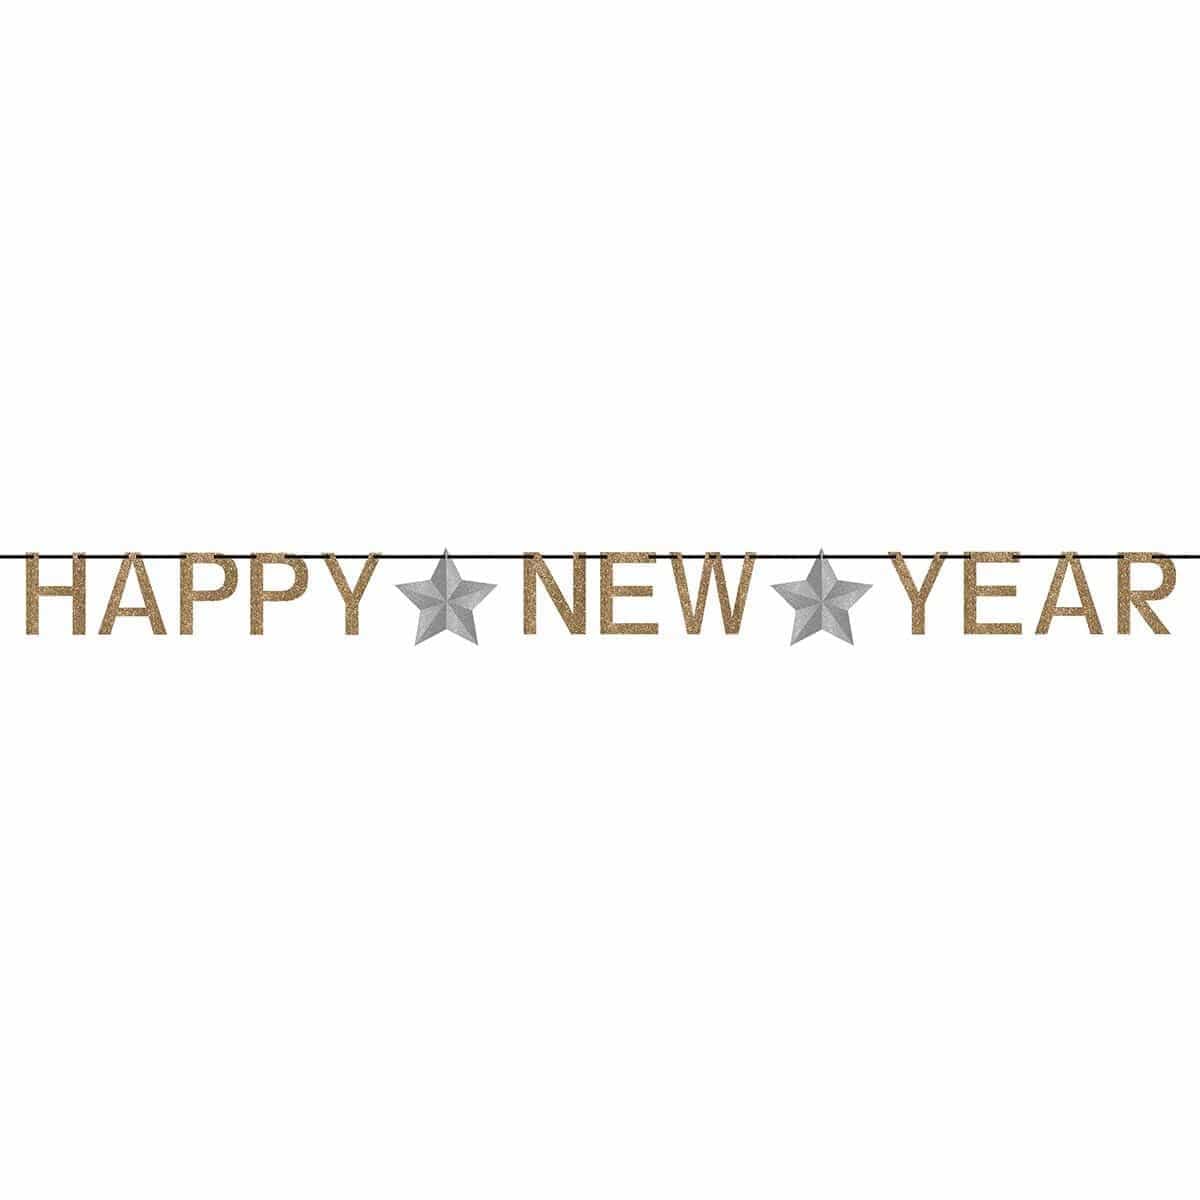 Buy New Year Happy New Year Ribbon Banner W/glitter Paper Letters - Silver & Gold 12 X 5 Po. sold at Party Expert